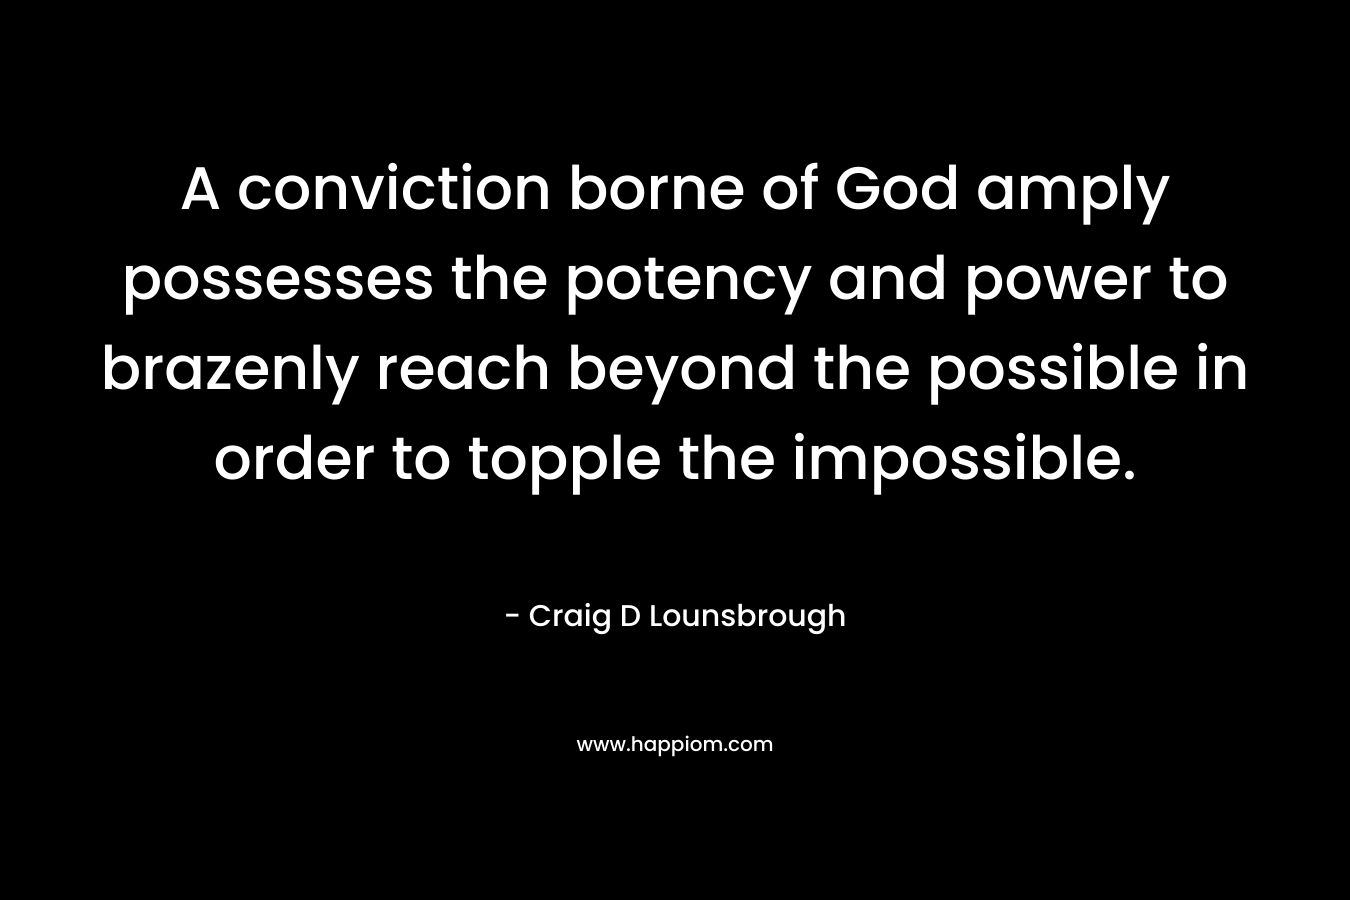 A conviction borne of God amply possesses the potency and power to brazenly reach beyond the possible in order to topple the impossible.